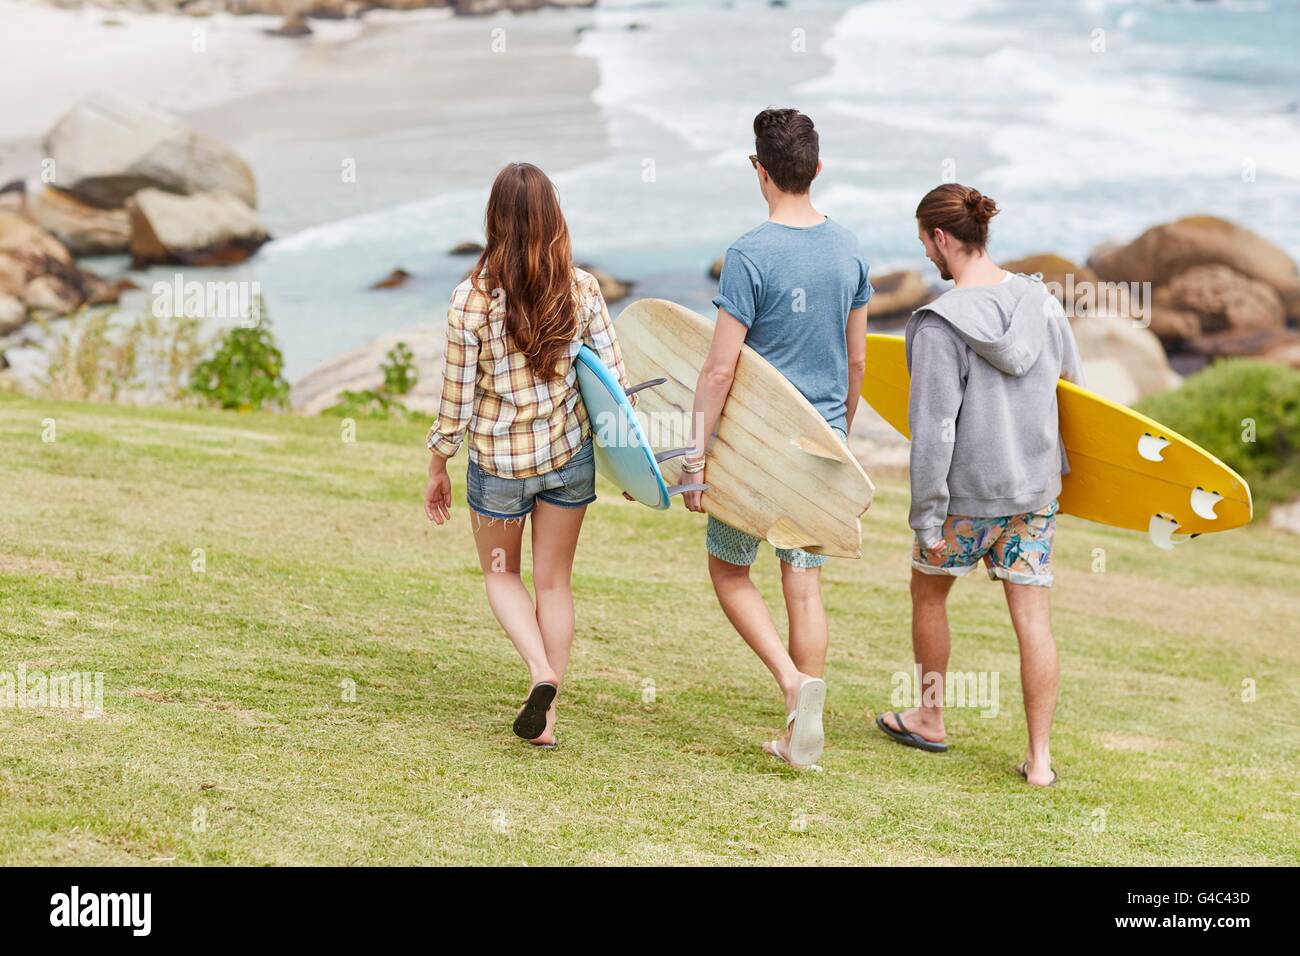 MODEL RELEASED. Three young adults walking towards beach with surfboards. Stock Photo